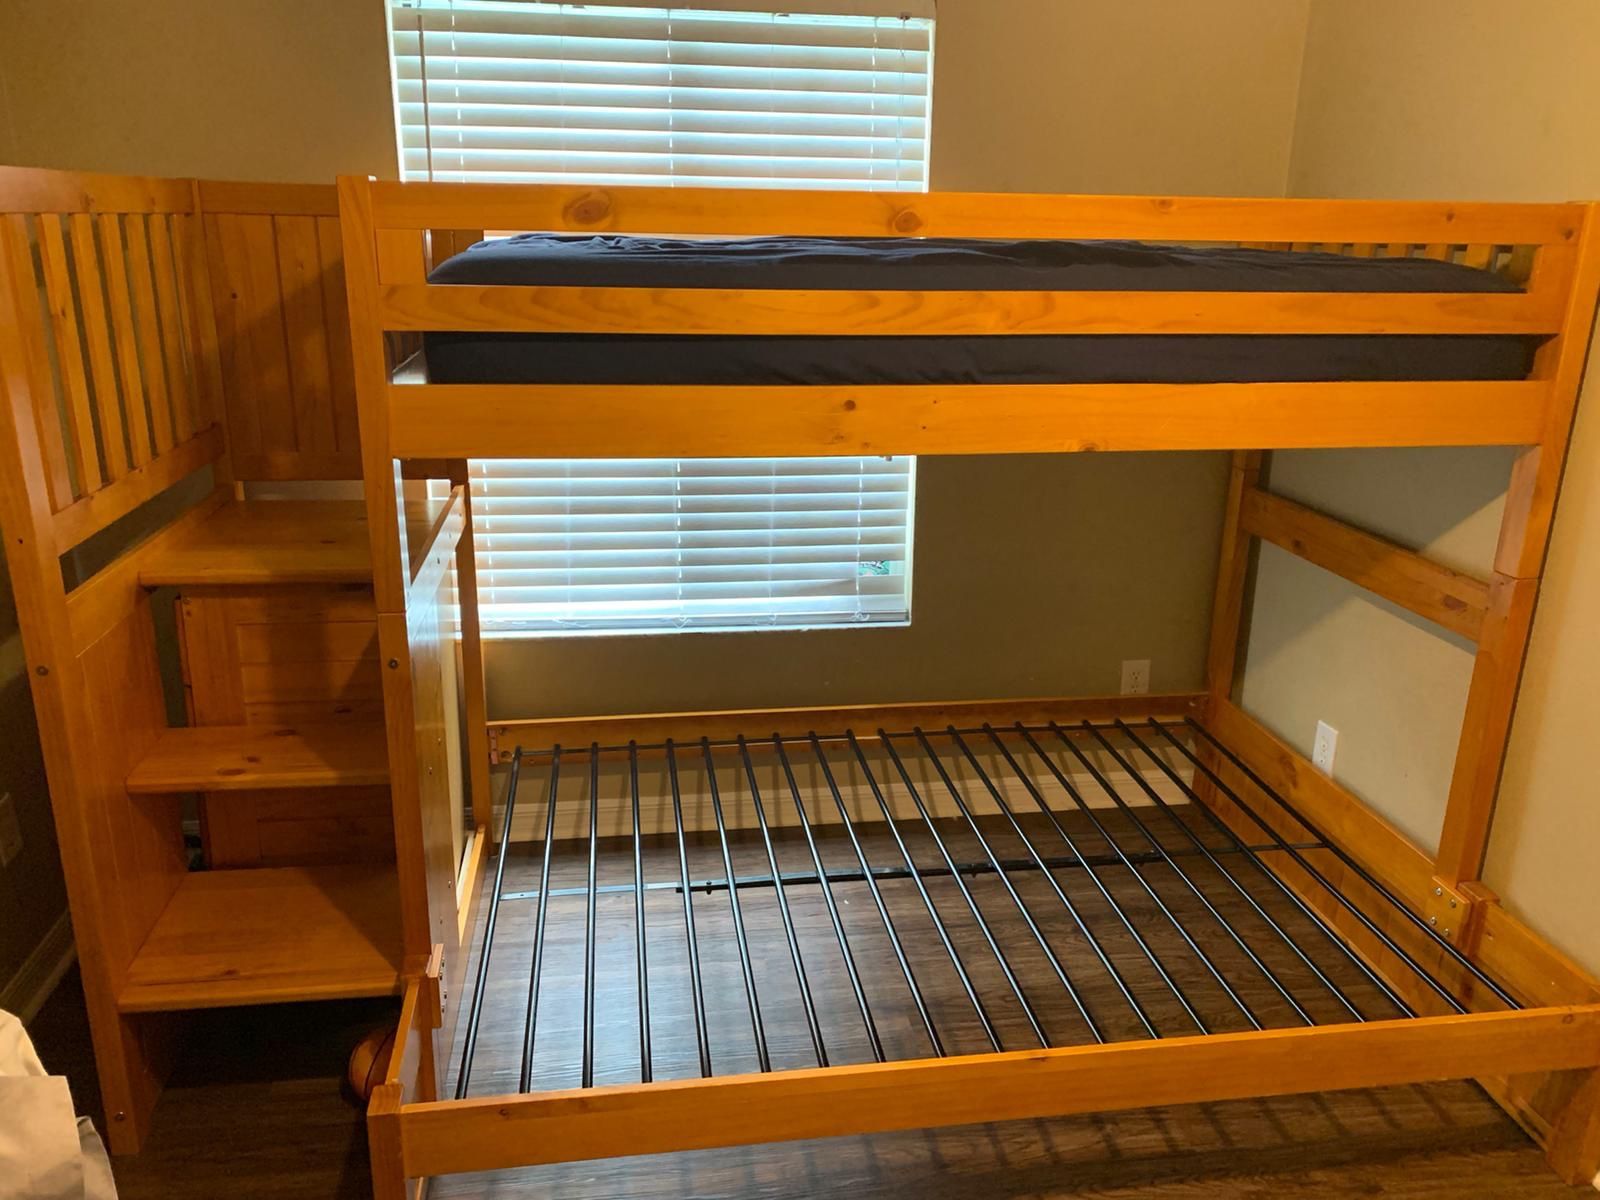 Used triple full bunk bed in good condition